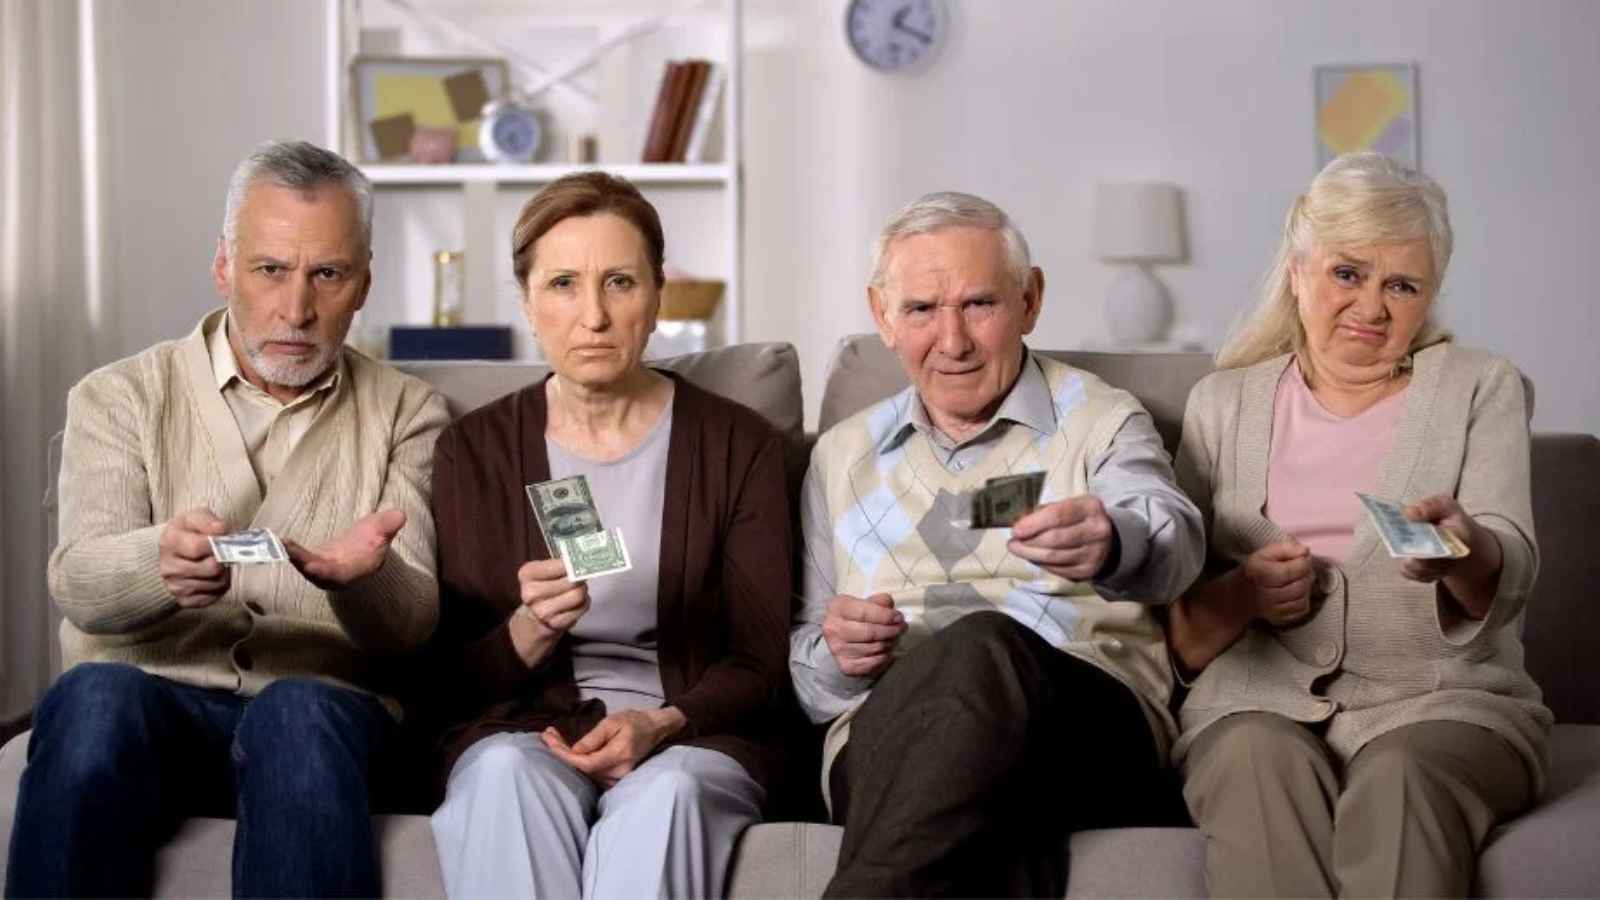 15 Reasons Why the Boomers Are the Most Disliked Generation